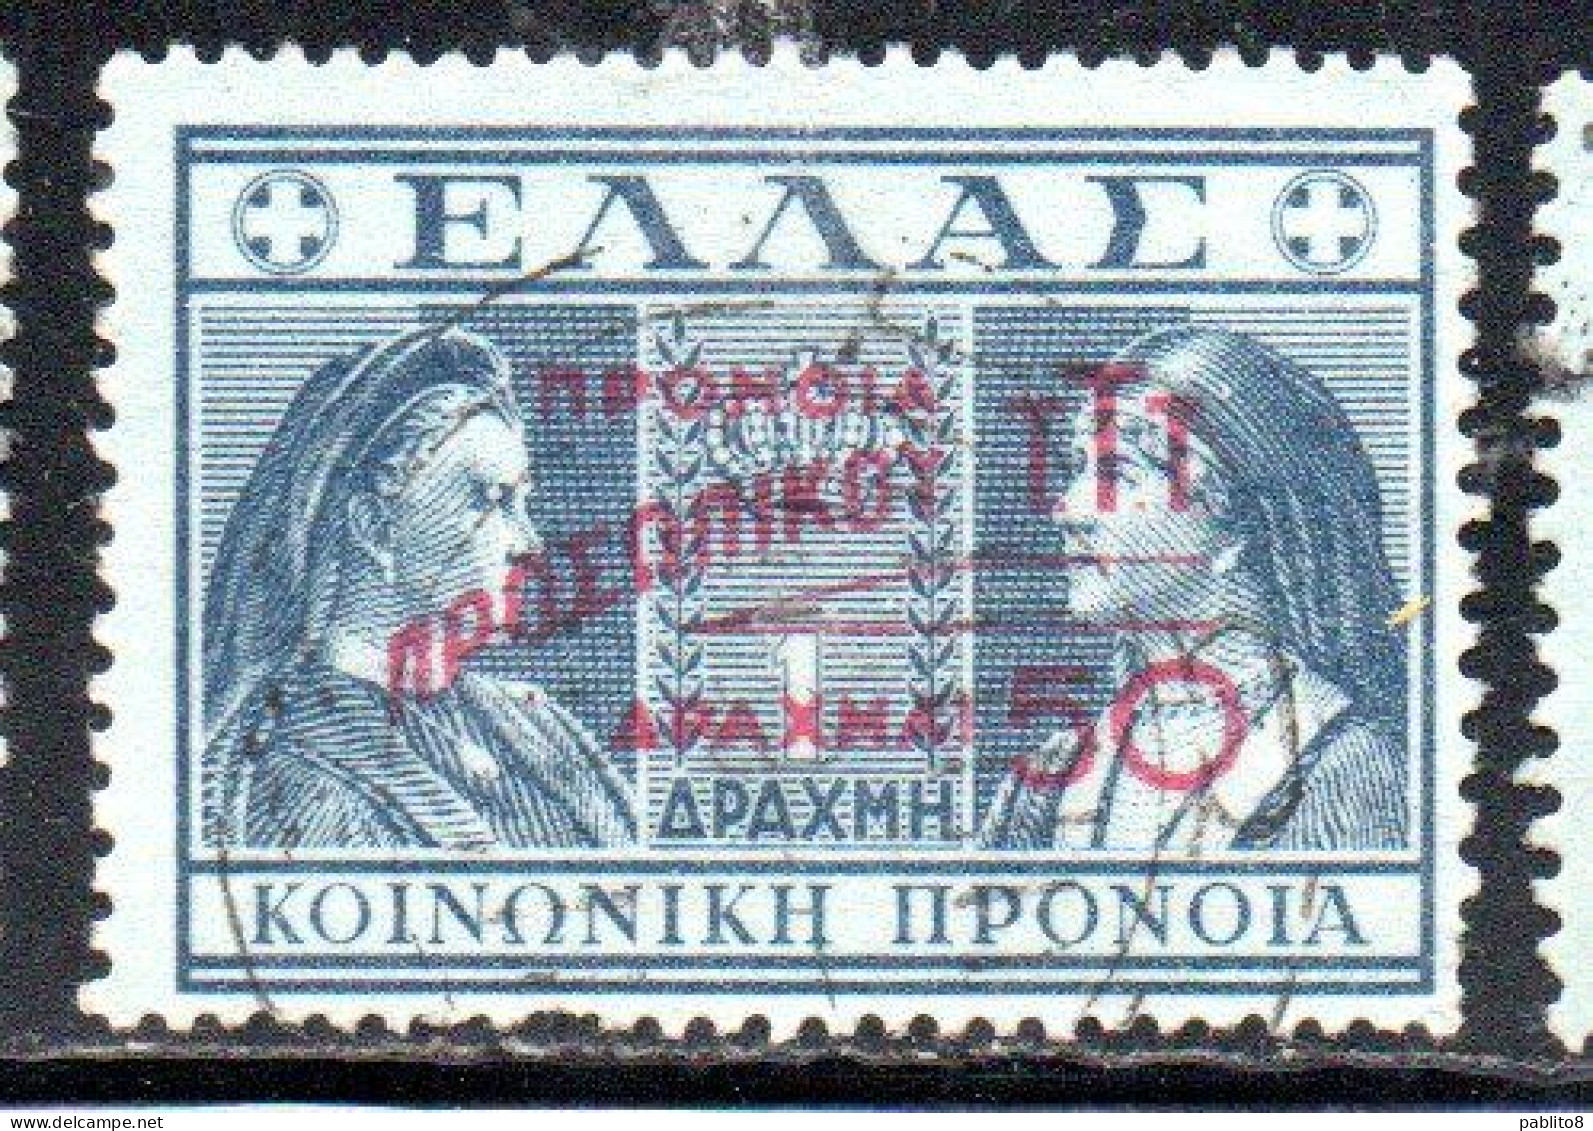 GREECE GRECIA ELLAS 1946 1947 POSTAL TAX STAMPS TUBERCULOSIS SURCHARGED 50d On 1d USED USATO OBLITERE' - Steuermarken